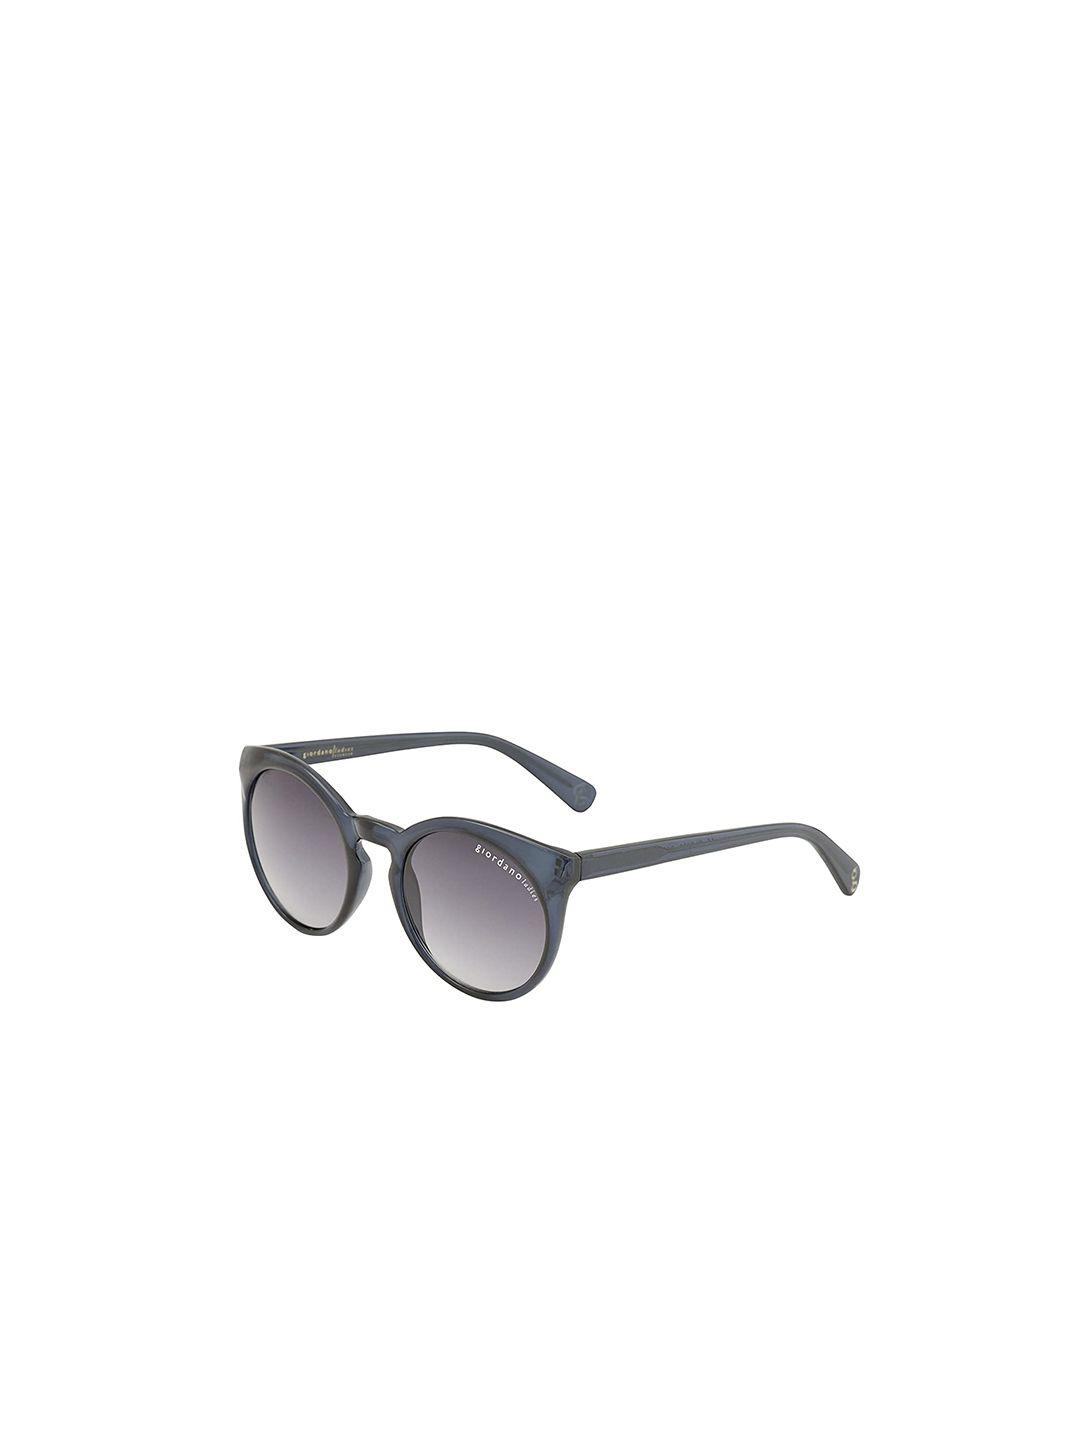 giordano women round sunglasses with uv protected lens gls806c004